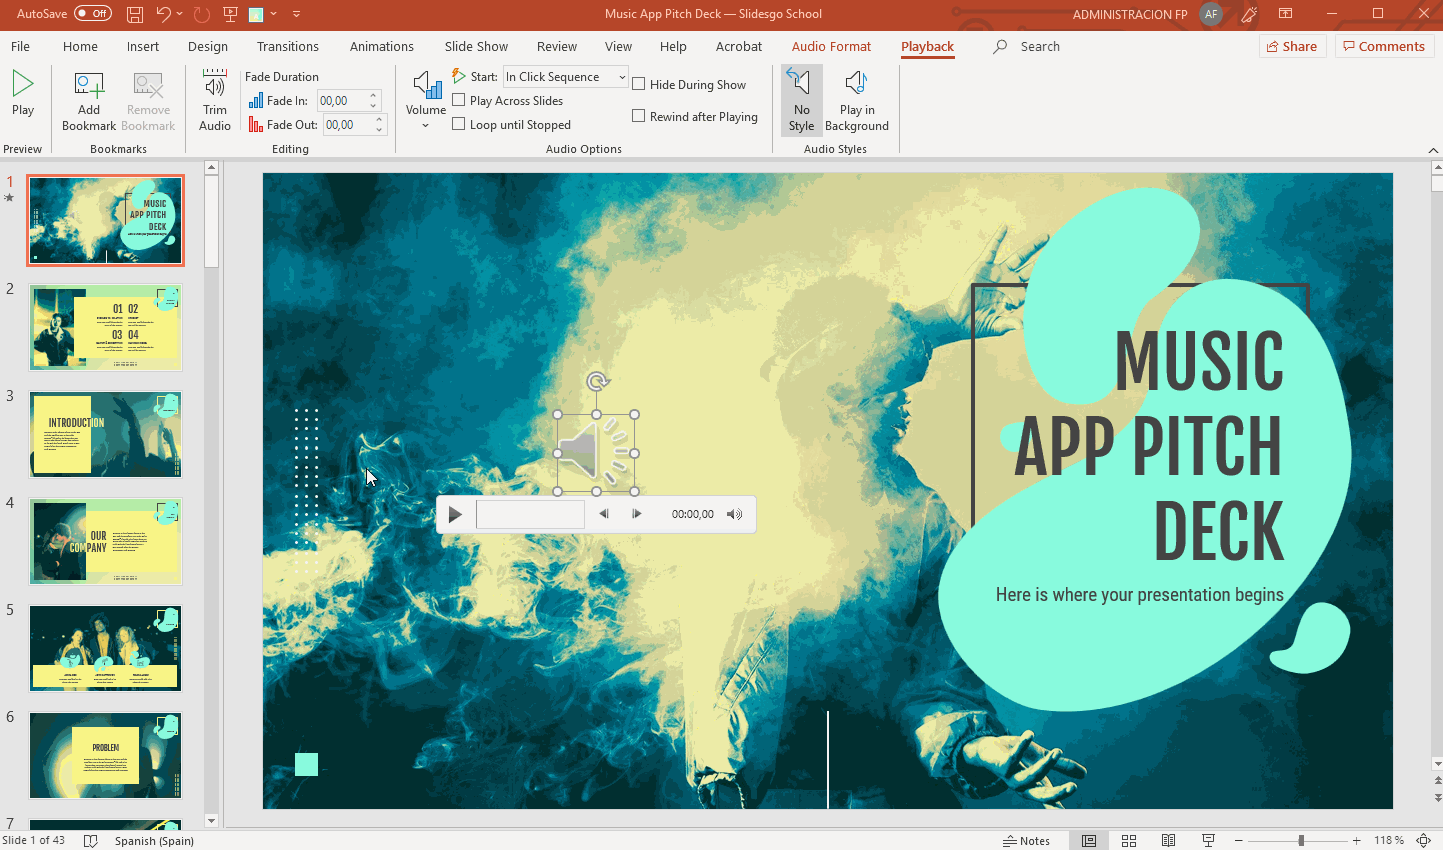 How to Add, Record or Edit Audio or Music in PowerPoint -10